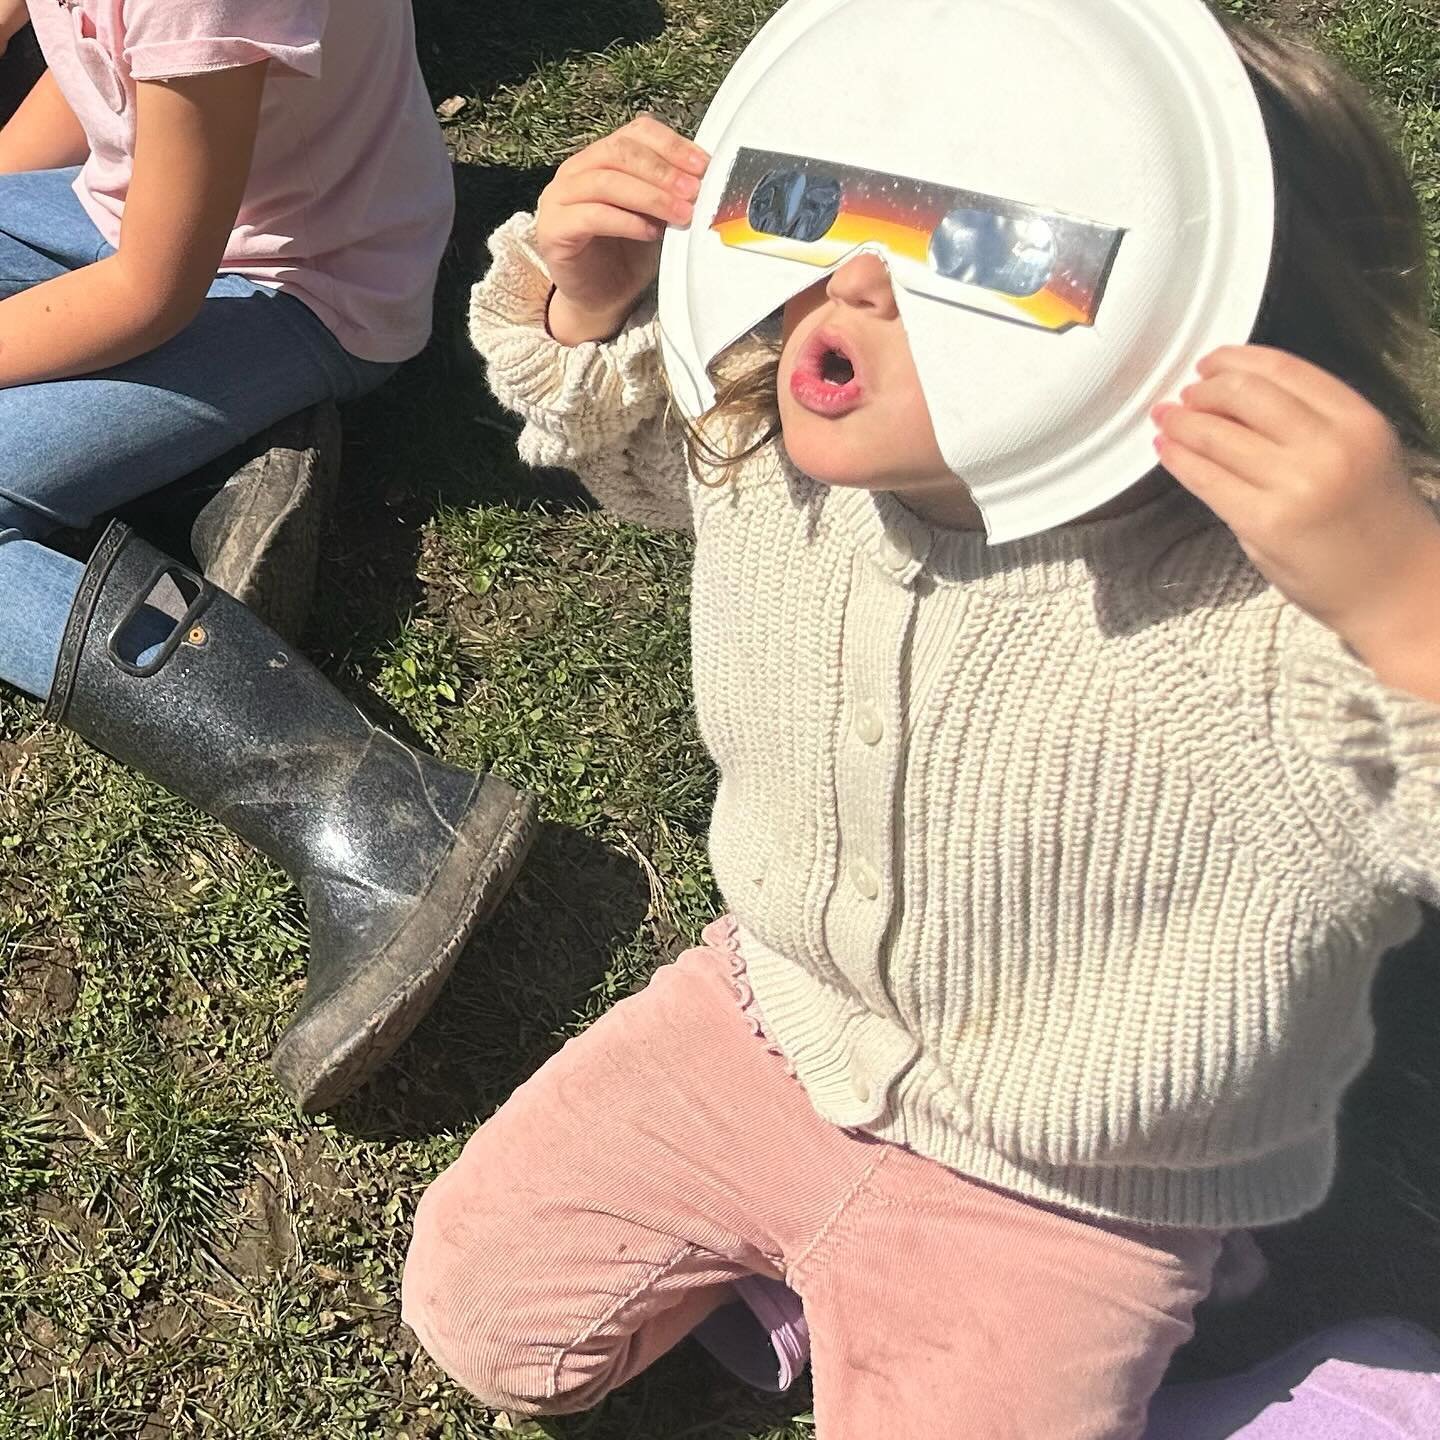 What an incredible sight! Students today were in awe as they witnessed the mesmerizing solar eclipse phenomenon. Gathering with friends in the yard to safely observe the celestial event, was such a cool experience!